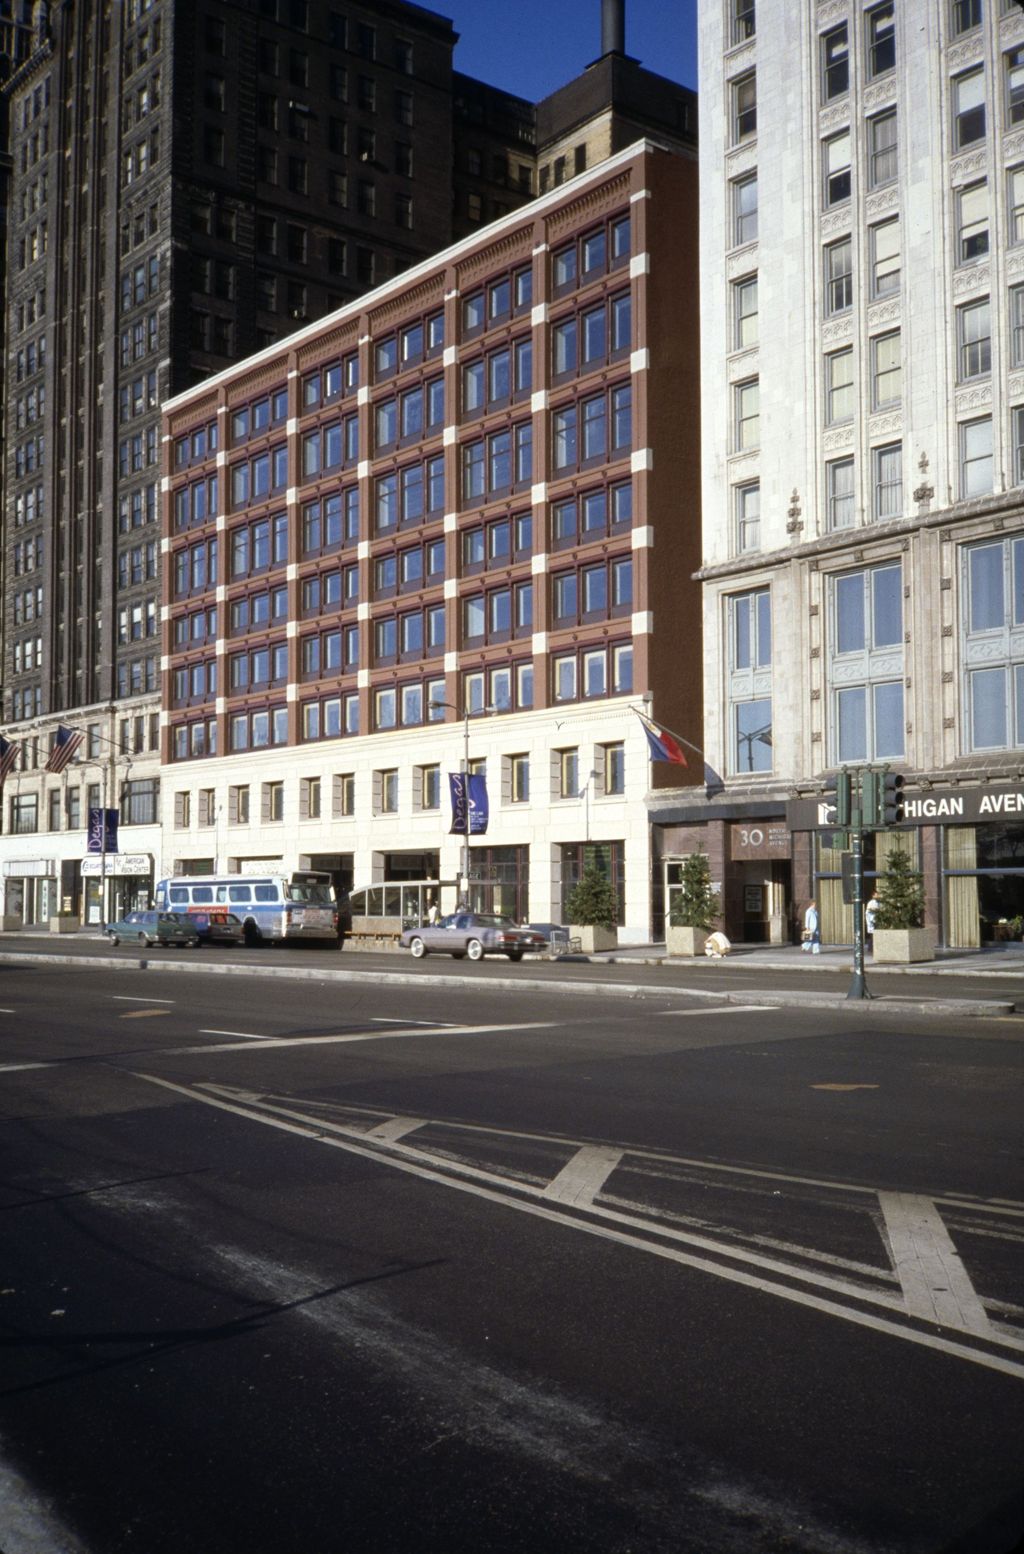 Miniature of Smith, Gaylord, and Cross Building, North Michigan Avenue